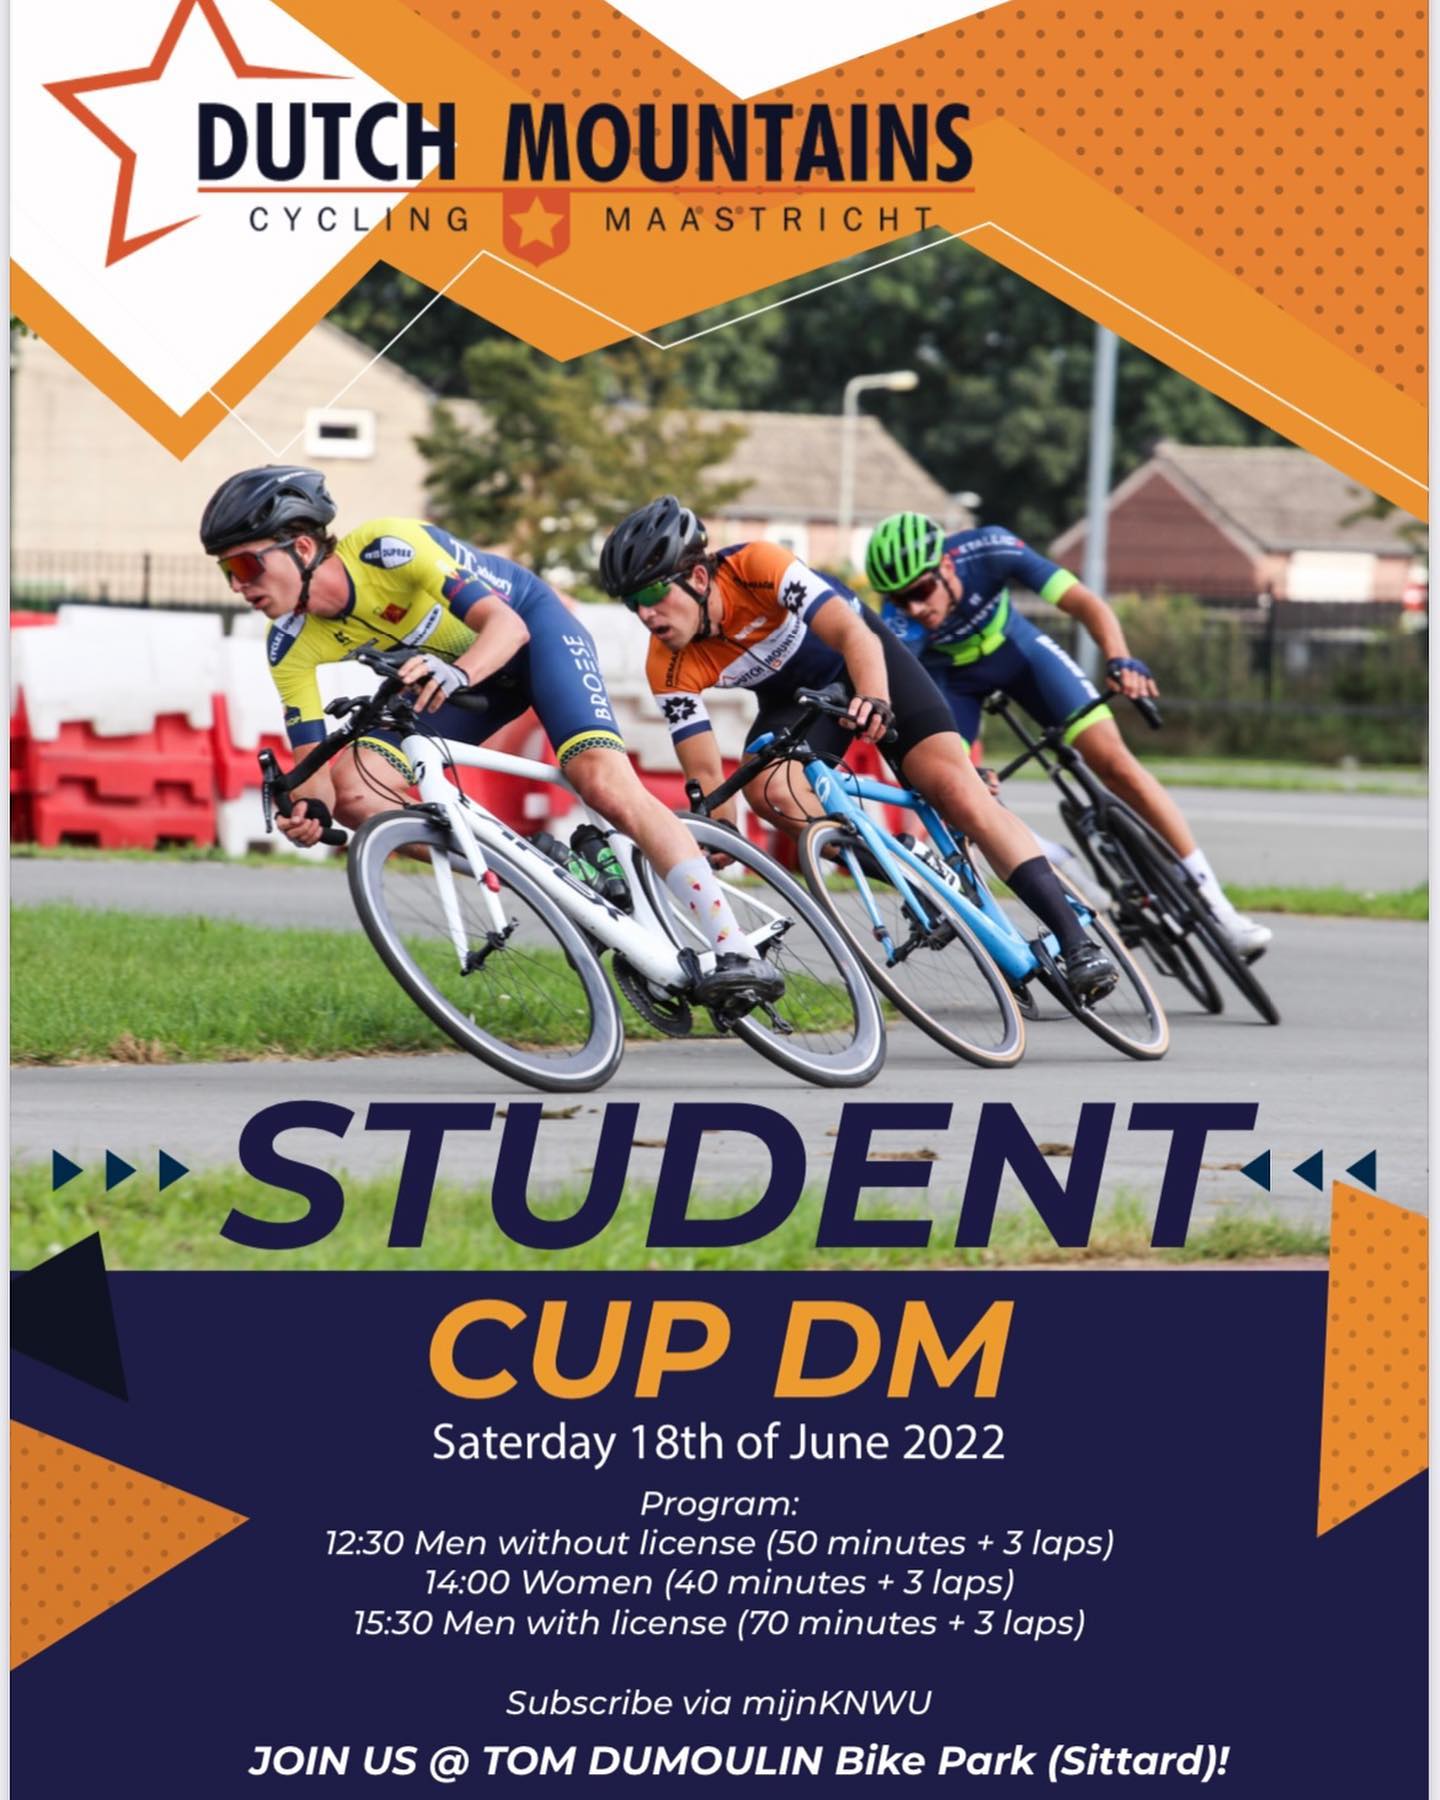 UPDATE: WE HAD TO CANCEL THE STUDENT CUP DUE TO THE EXPECTED HEAT!!!!
⭐️Student Cup DM⭐️

On Saturday 18th of June, we will organize our own student cup at the Tom Dumoulin Bike Park. 
Subscription via mijnKNWU will open soon. 

Let’s see who will be the fastest on this track! 🏁
🧡💙